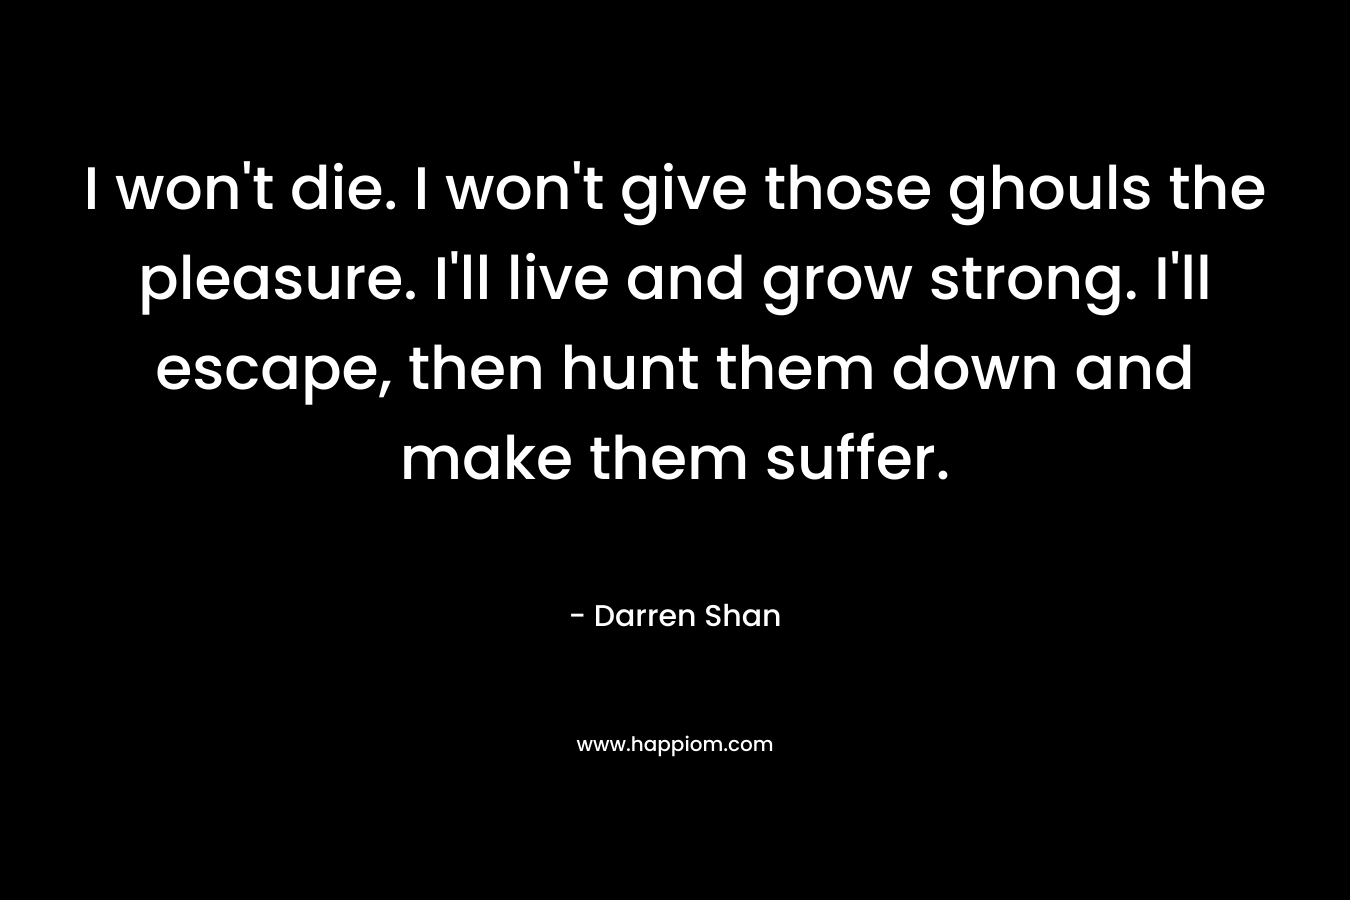 I won’t die. I won’t give those ghouls the pleasure. I’ll live and grow strong. I’ll escape, then hunt them down and make them suffer. – Darren Shan